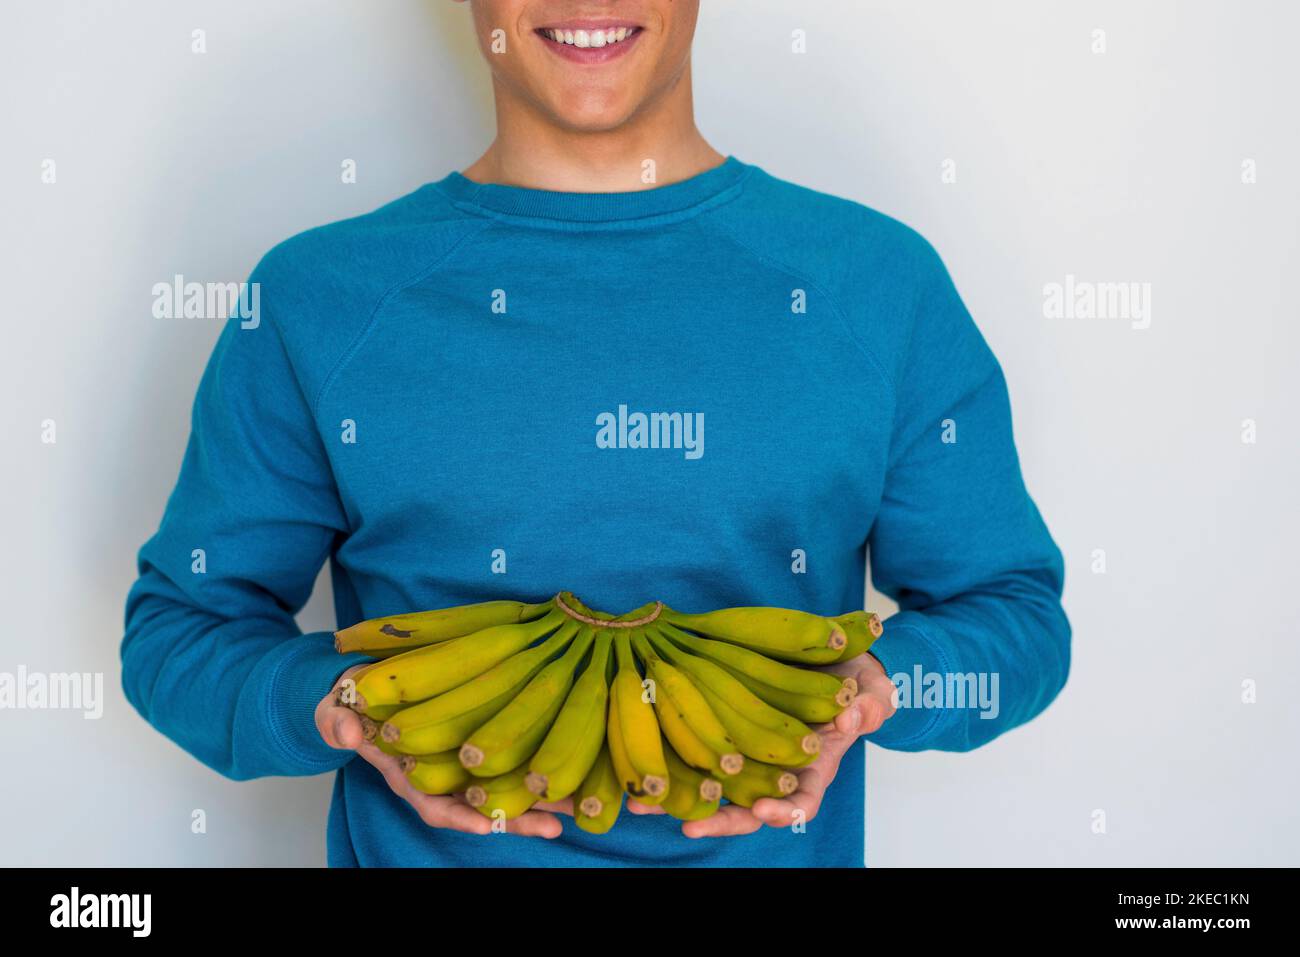 portrait and close up of man or teenager or young boy holding a lot of bananas and smiling looking at the camera - holding fruit - healthy lifestyle and concept and properties of banana Stock Photo